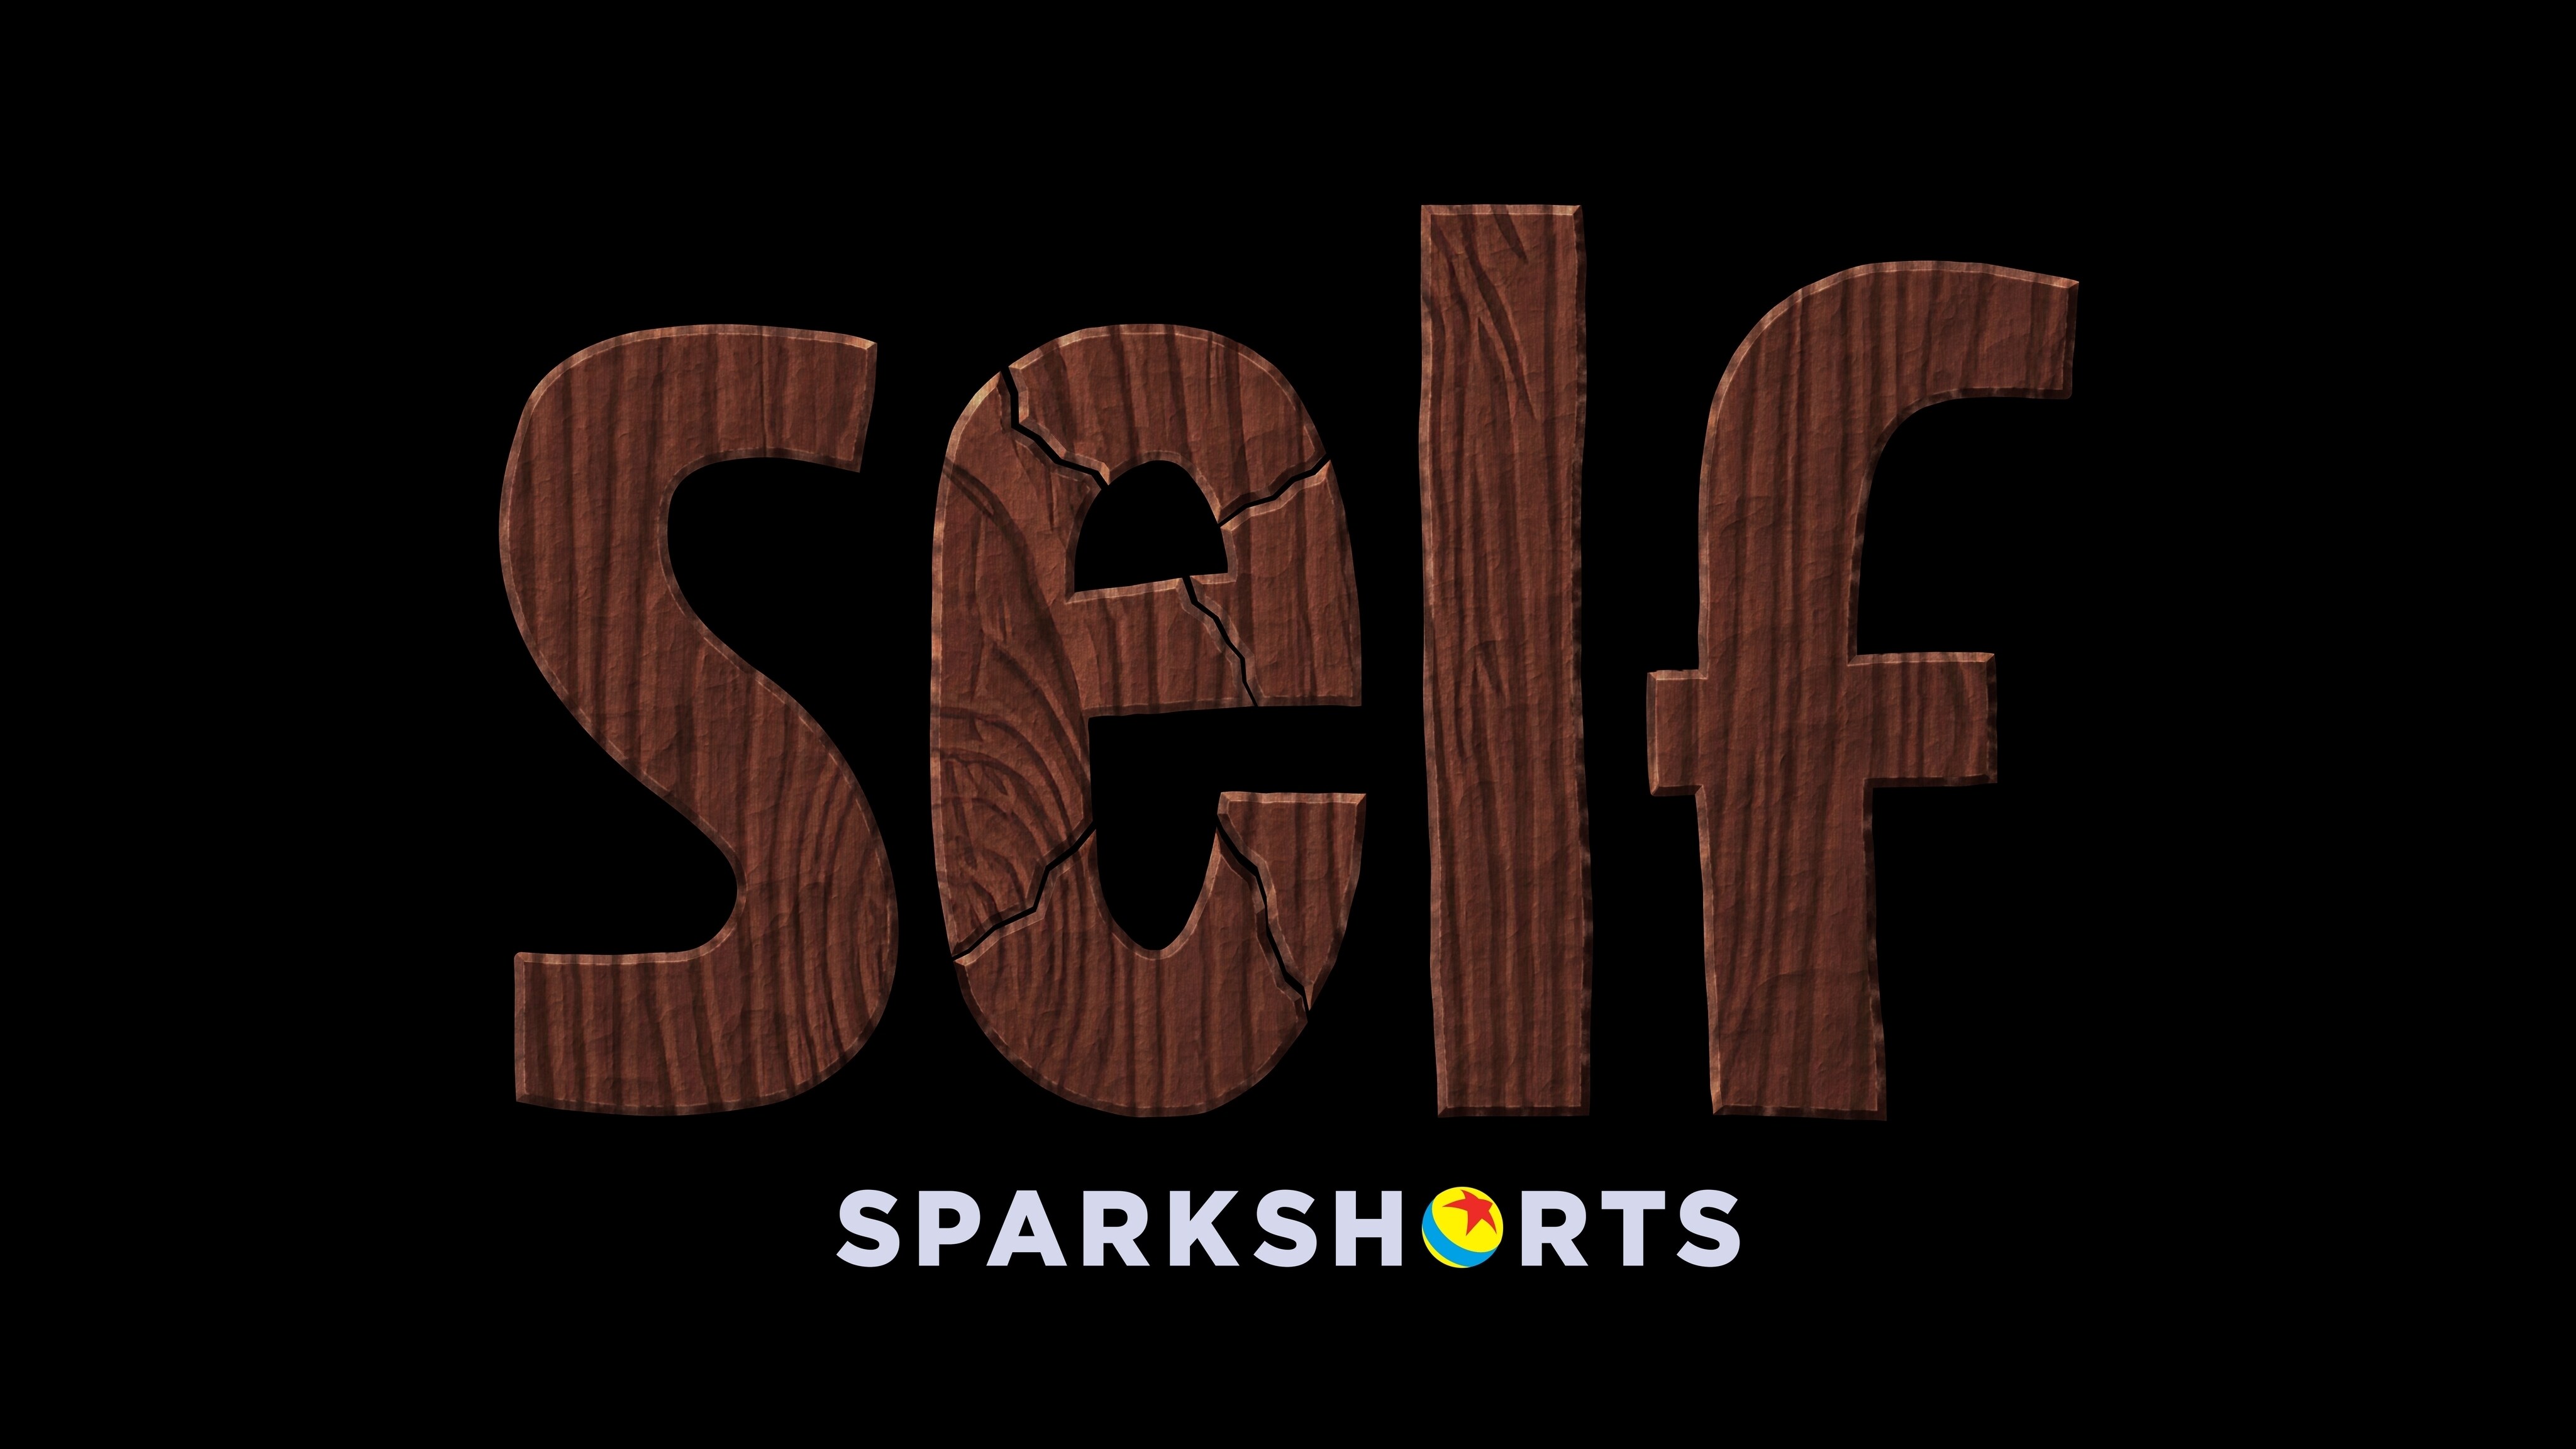 KEY ART AND STILLS NOW AVAILABLE FOR PIXAR’S ALL-NEW SPARKSHORT “SELF” NOW STREAMING ON DISNEY+